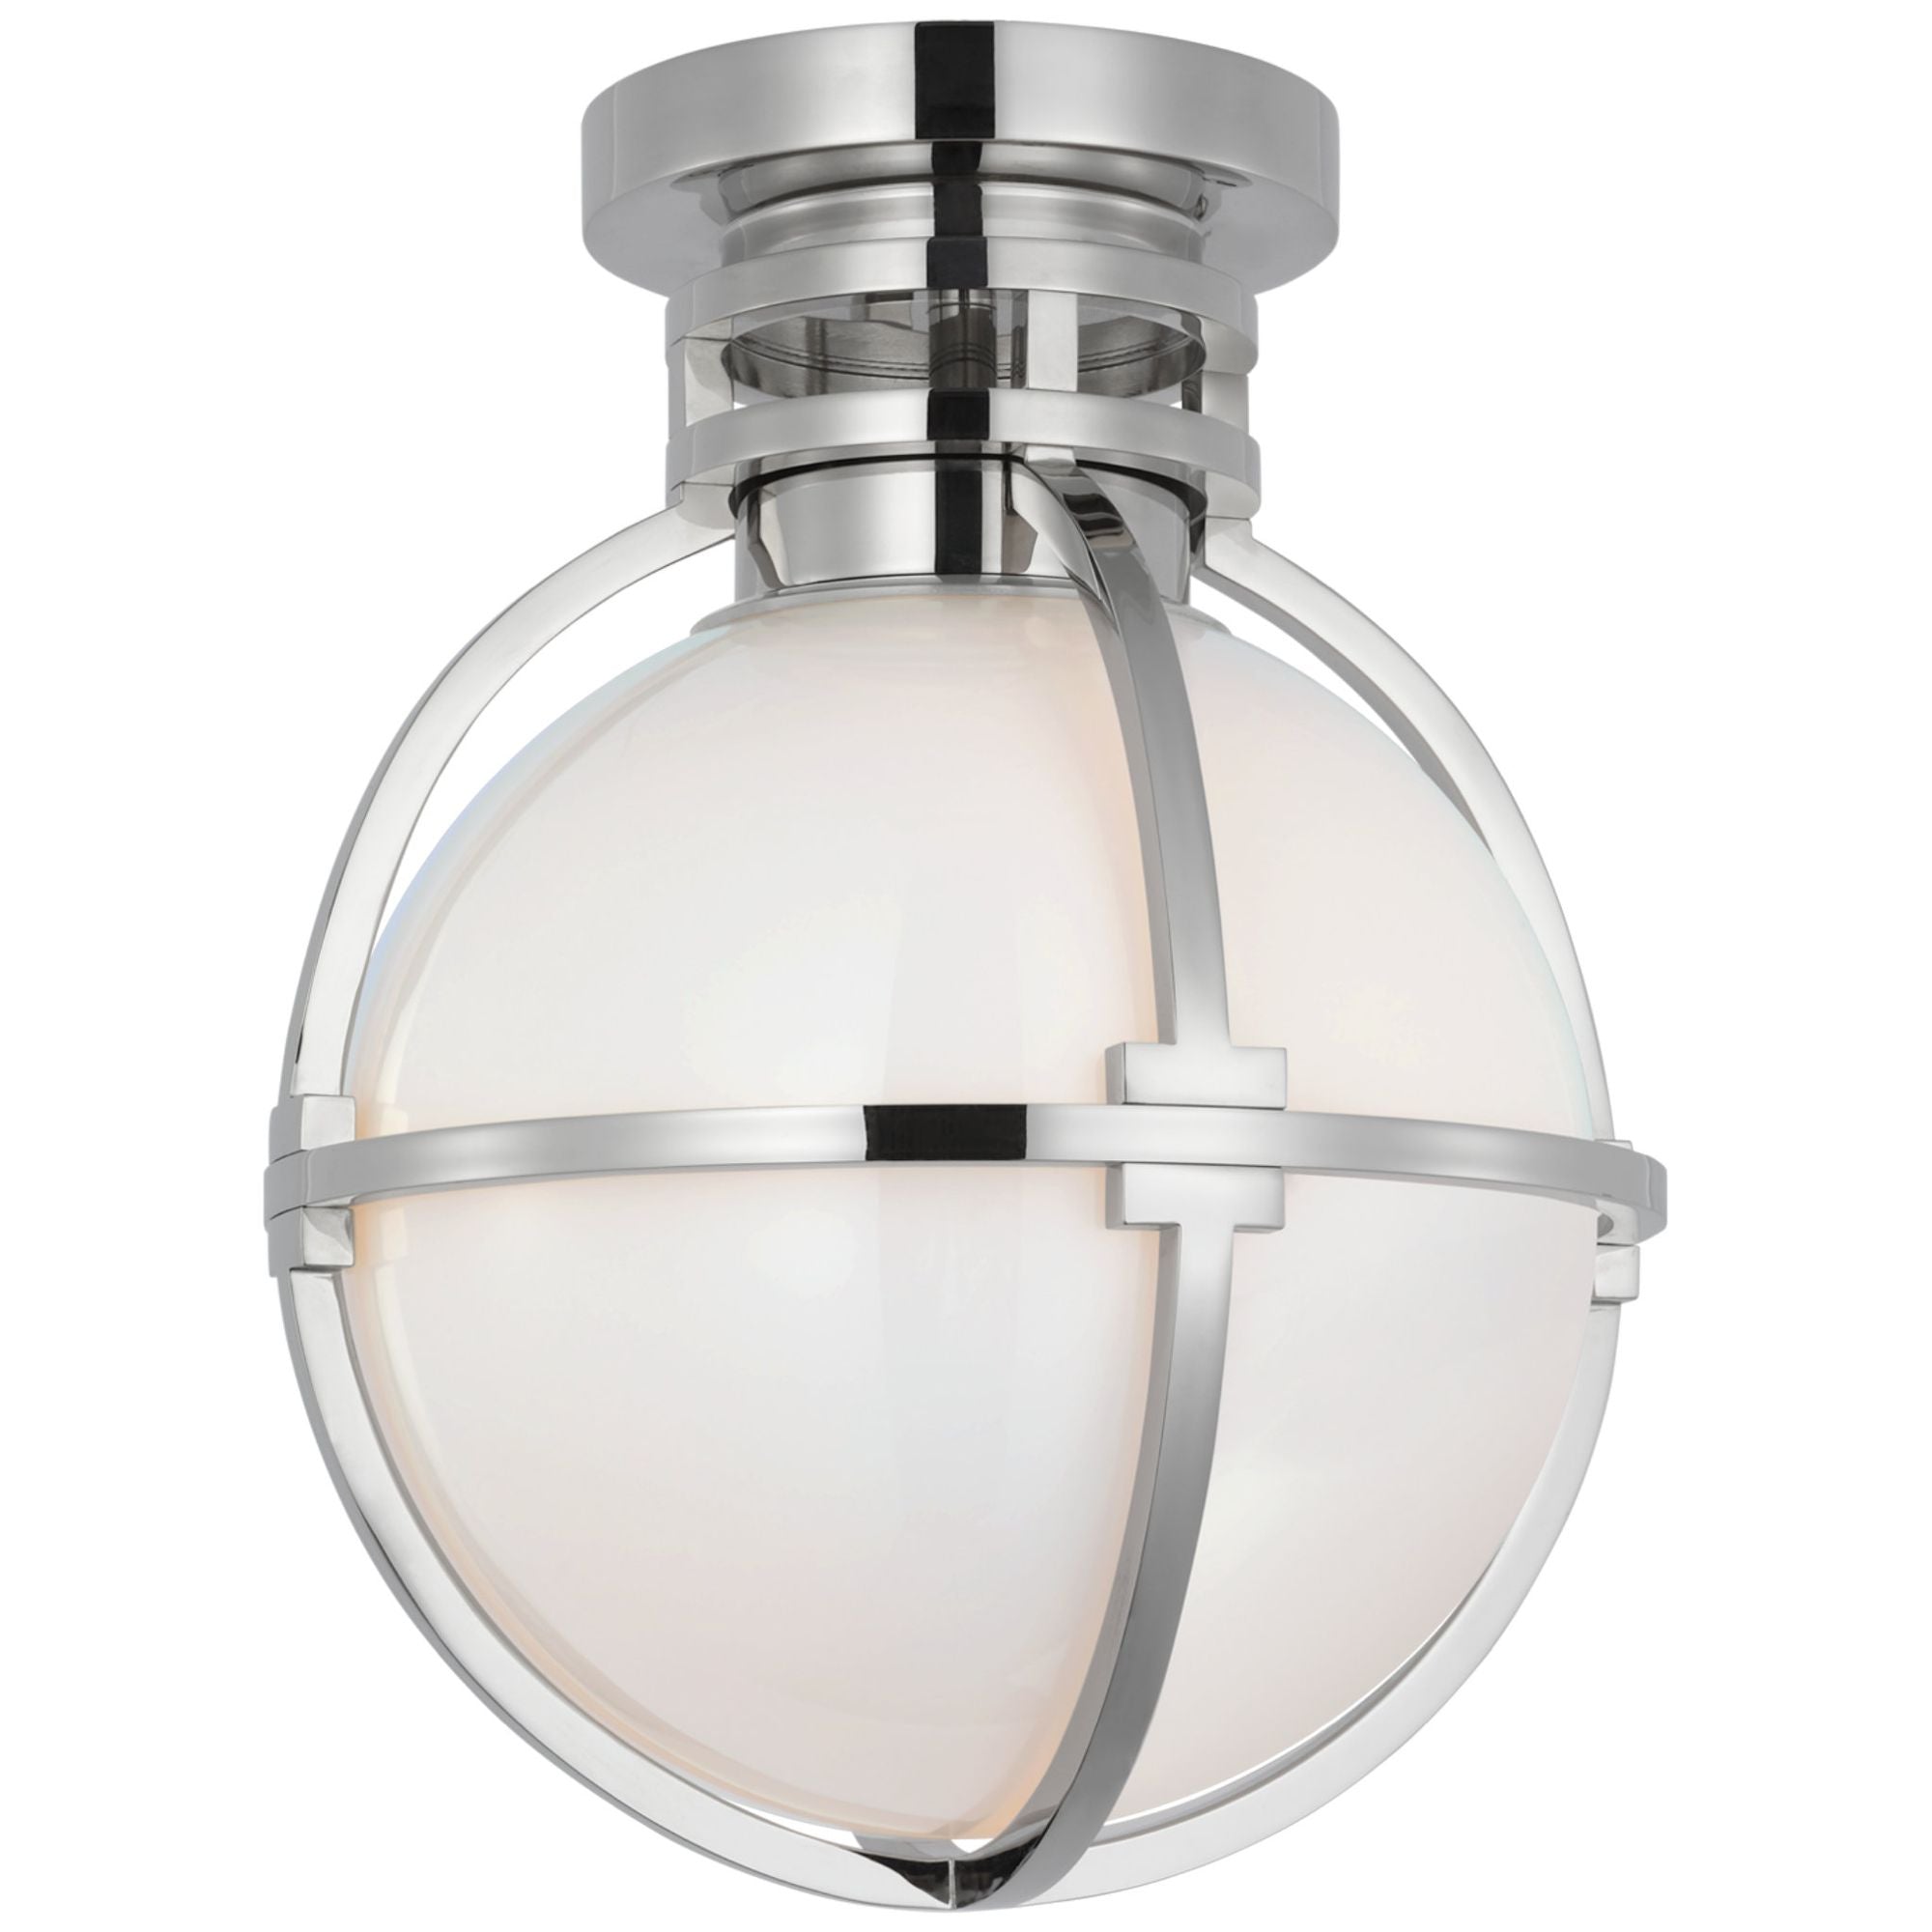 Chapman & Myers Gracie 10" Captured Globe Flush Mount in Polished Nickel with White Glass